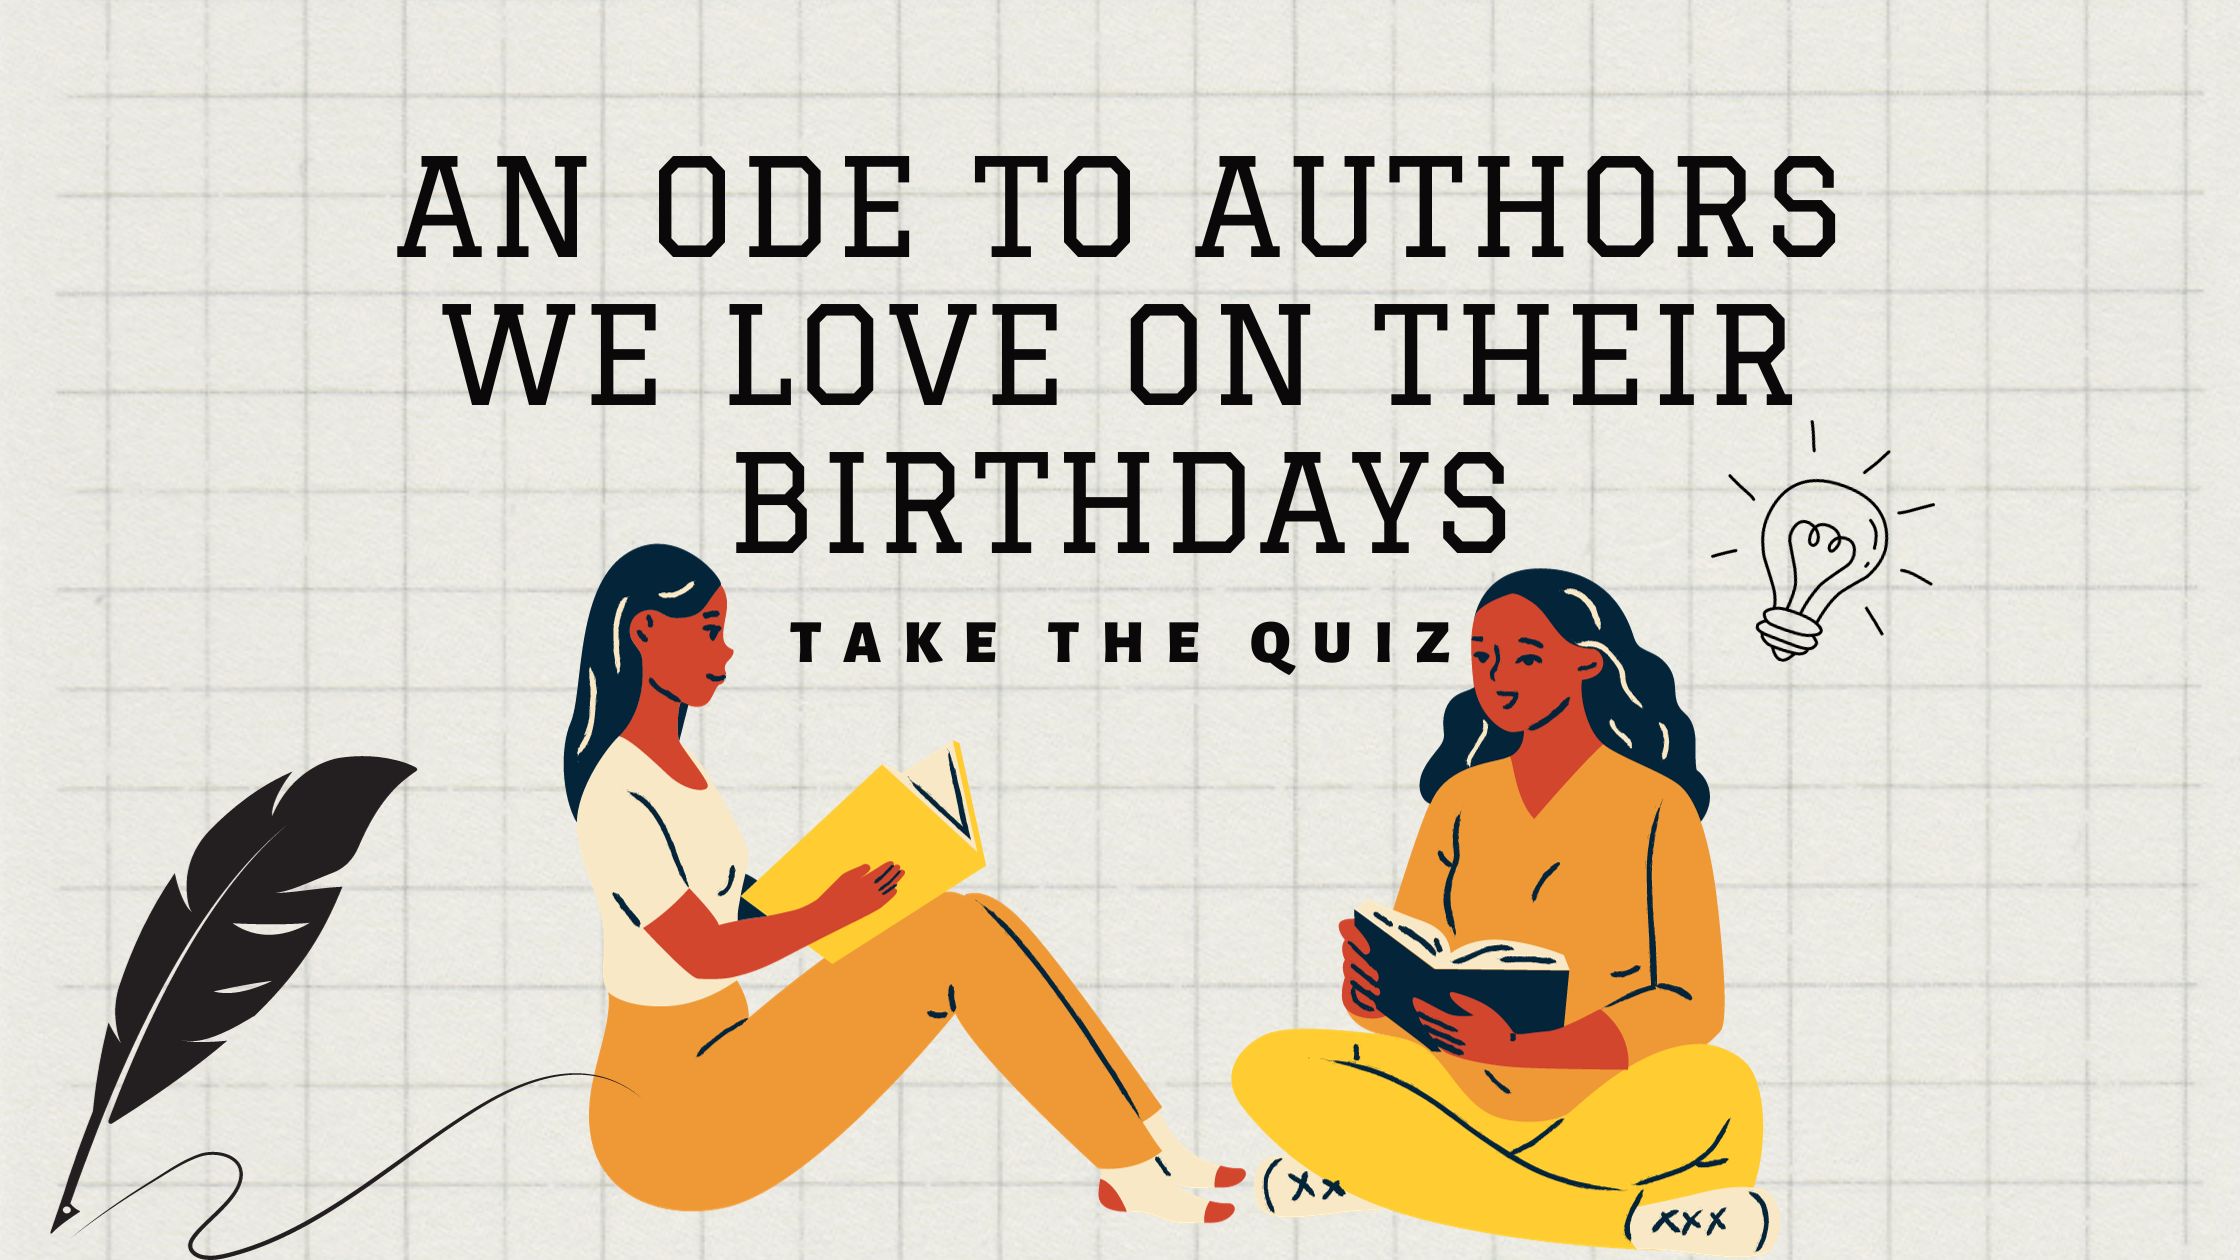 An ode to authors we love on their birthdays: Take the Quiz